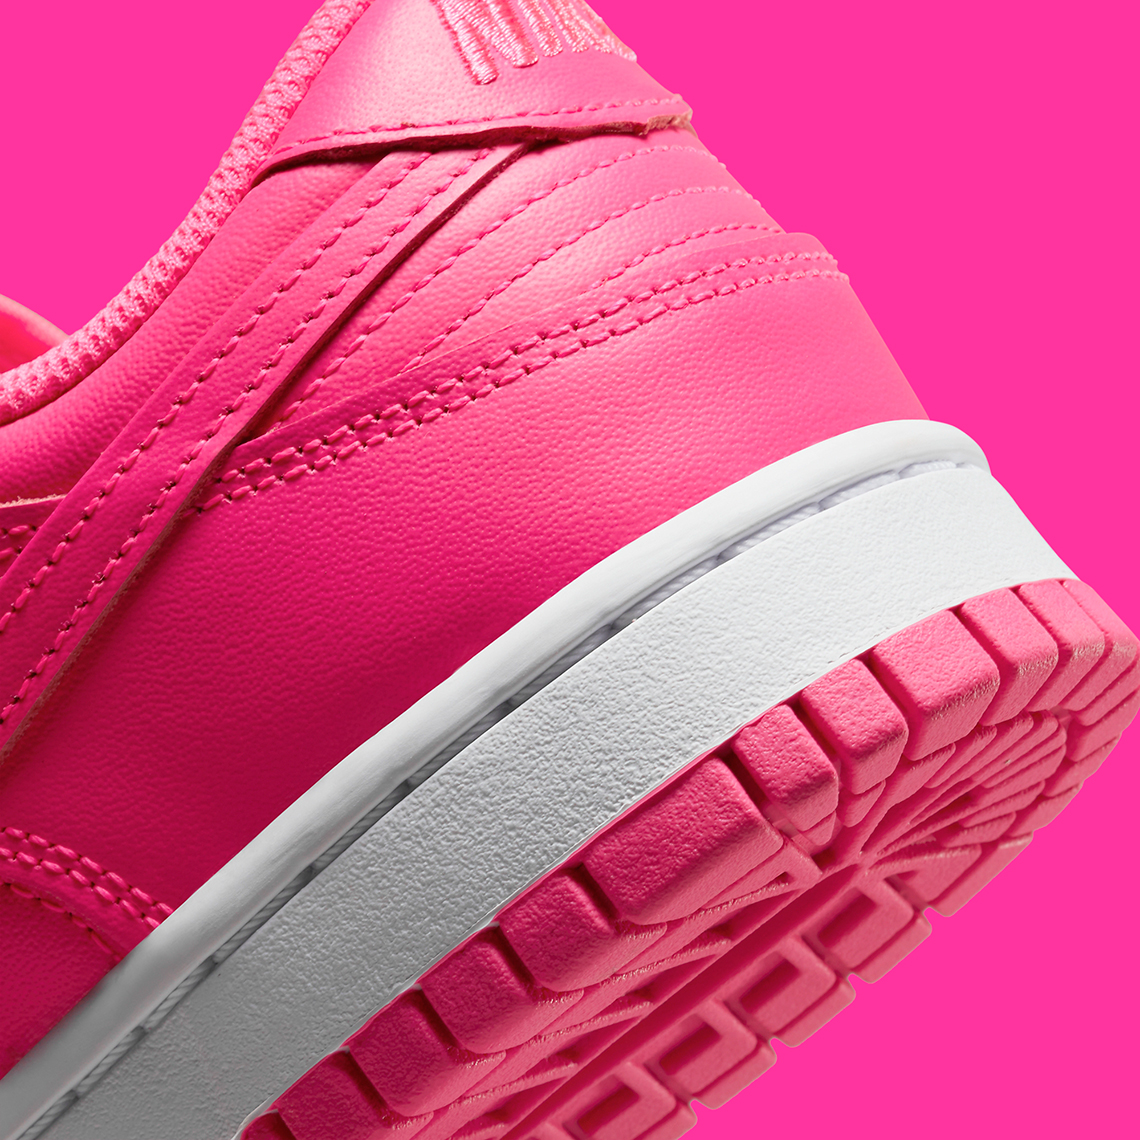 The UNDERCOVER x Nike Air Max 720 Surfaces In Three Colourways Hot Pink Dz5196 600 3